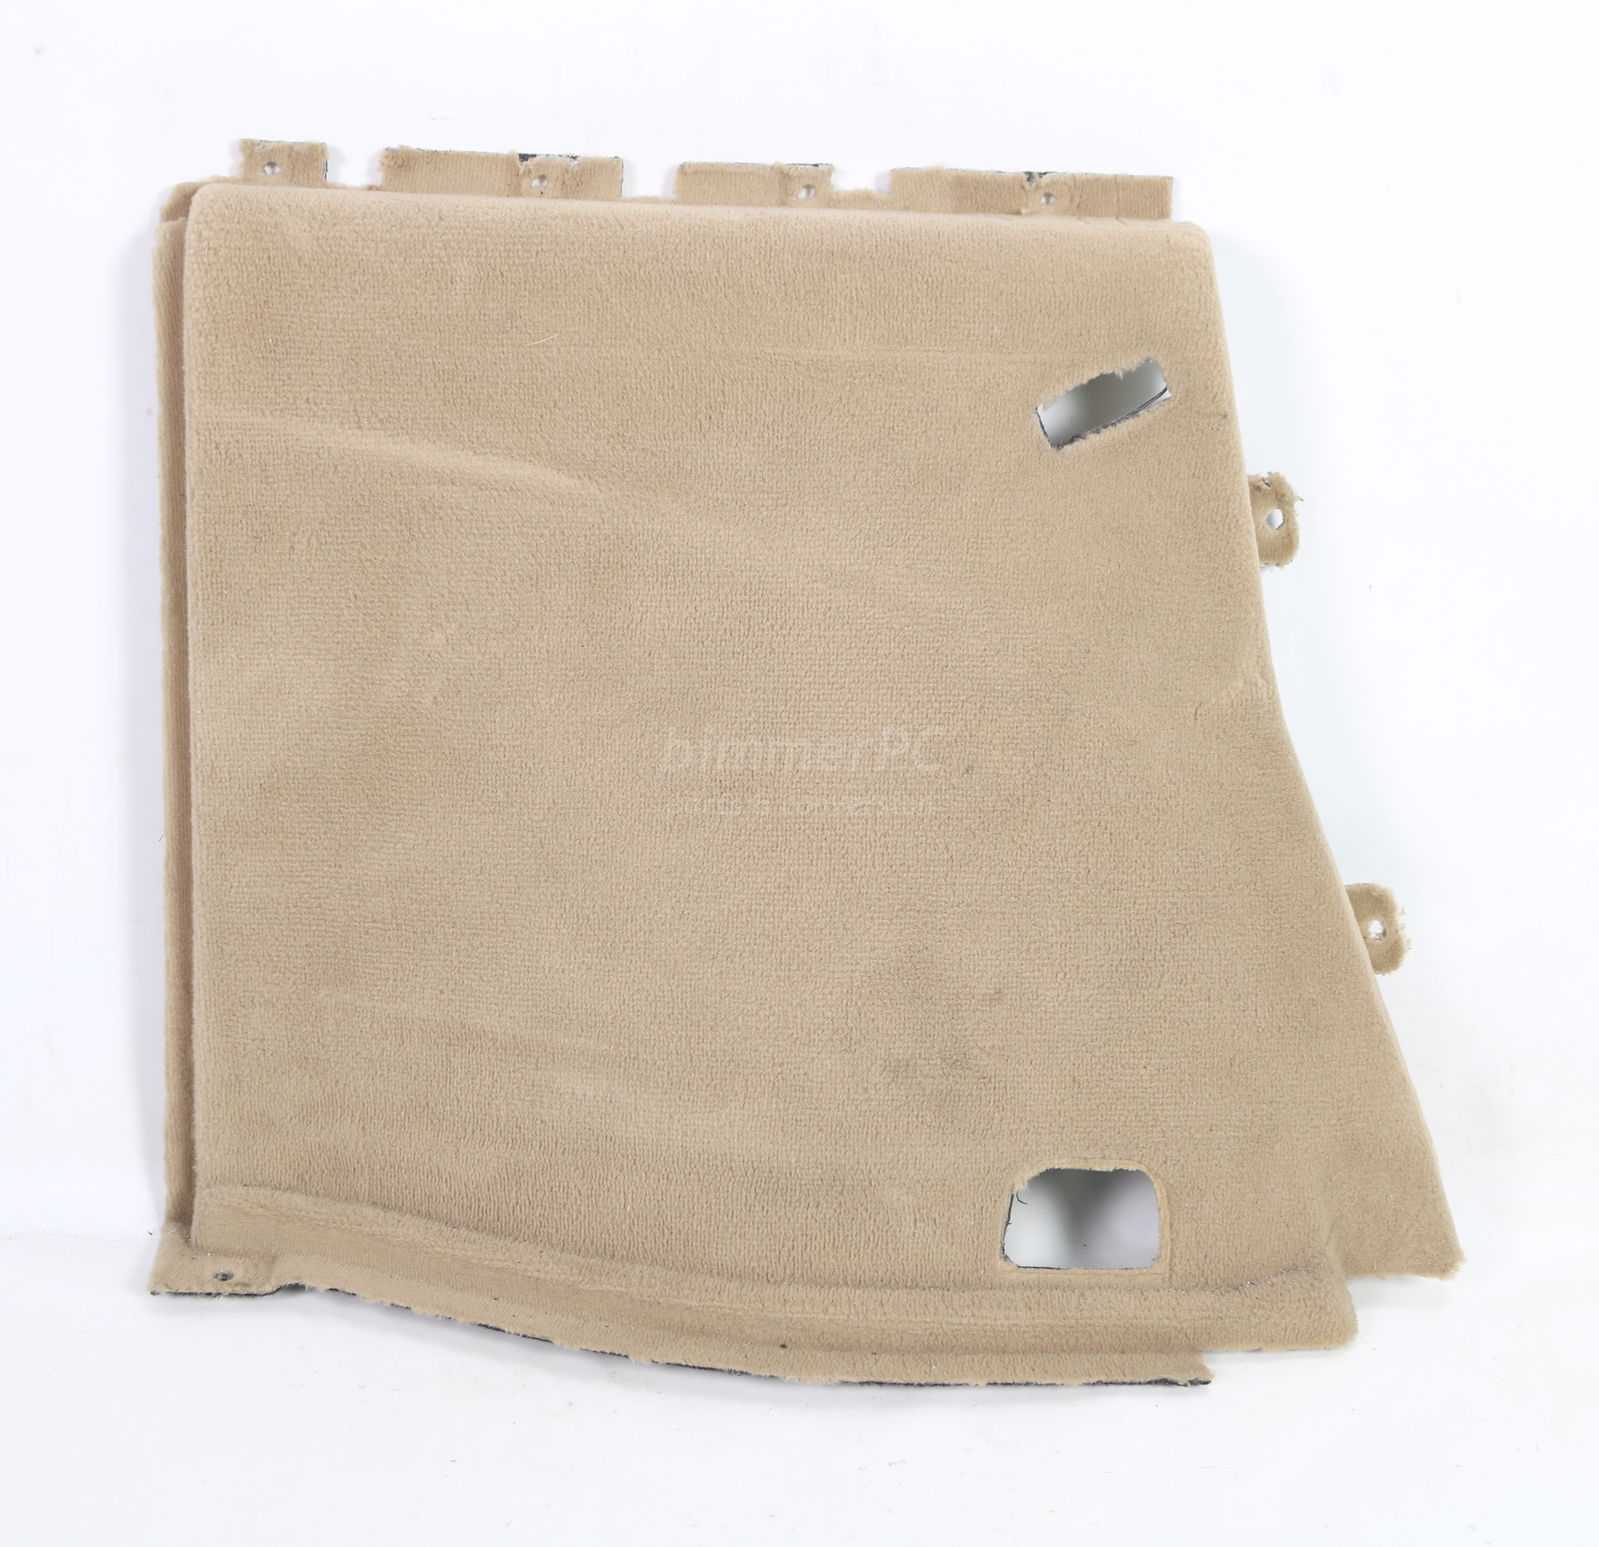 Primary image for BMW E53 X5 Tan Left Trunk Front Side Trim Panel Cover 2000-2006 OEM